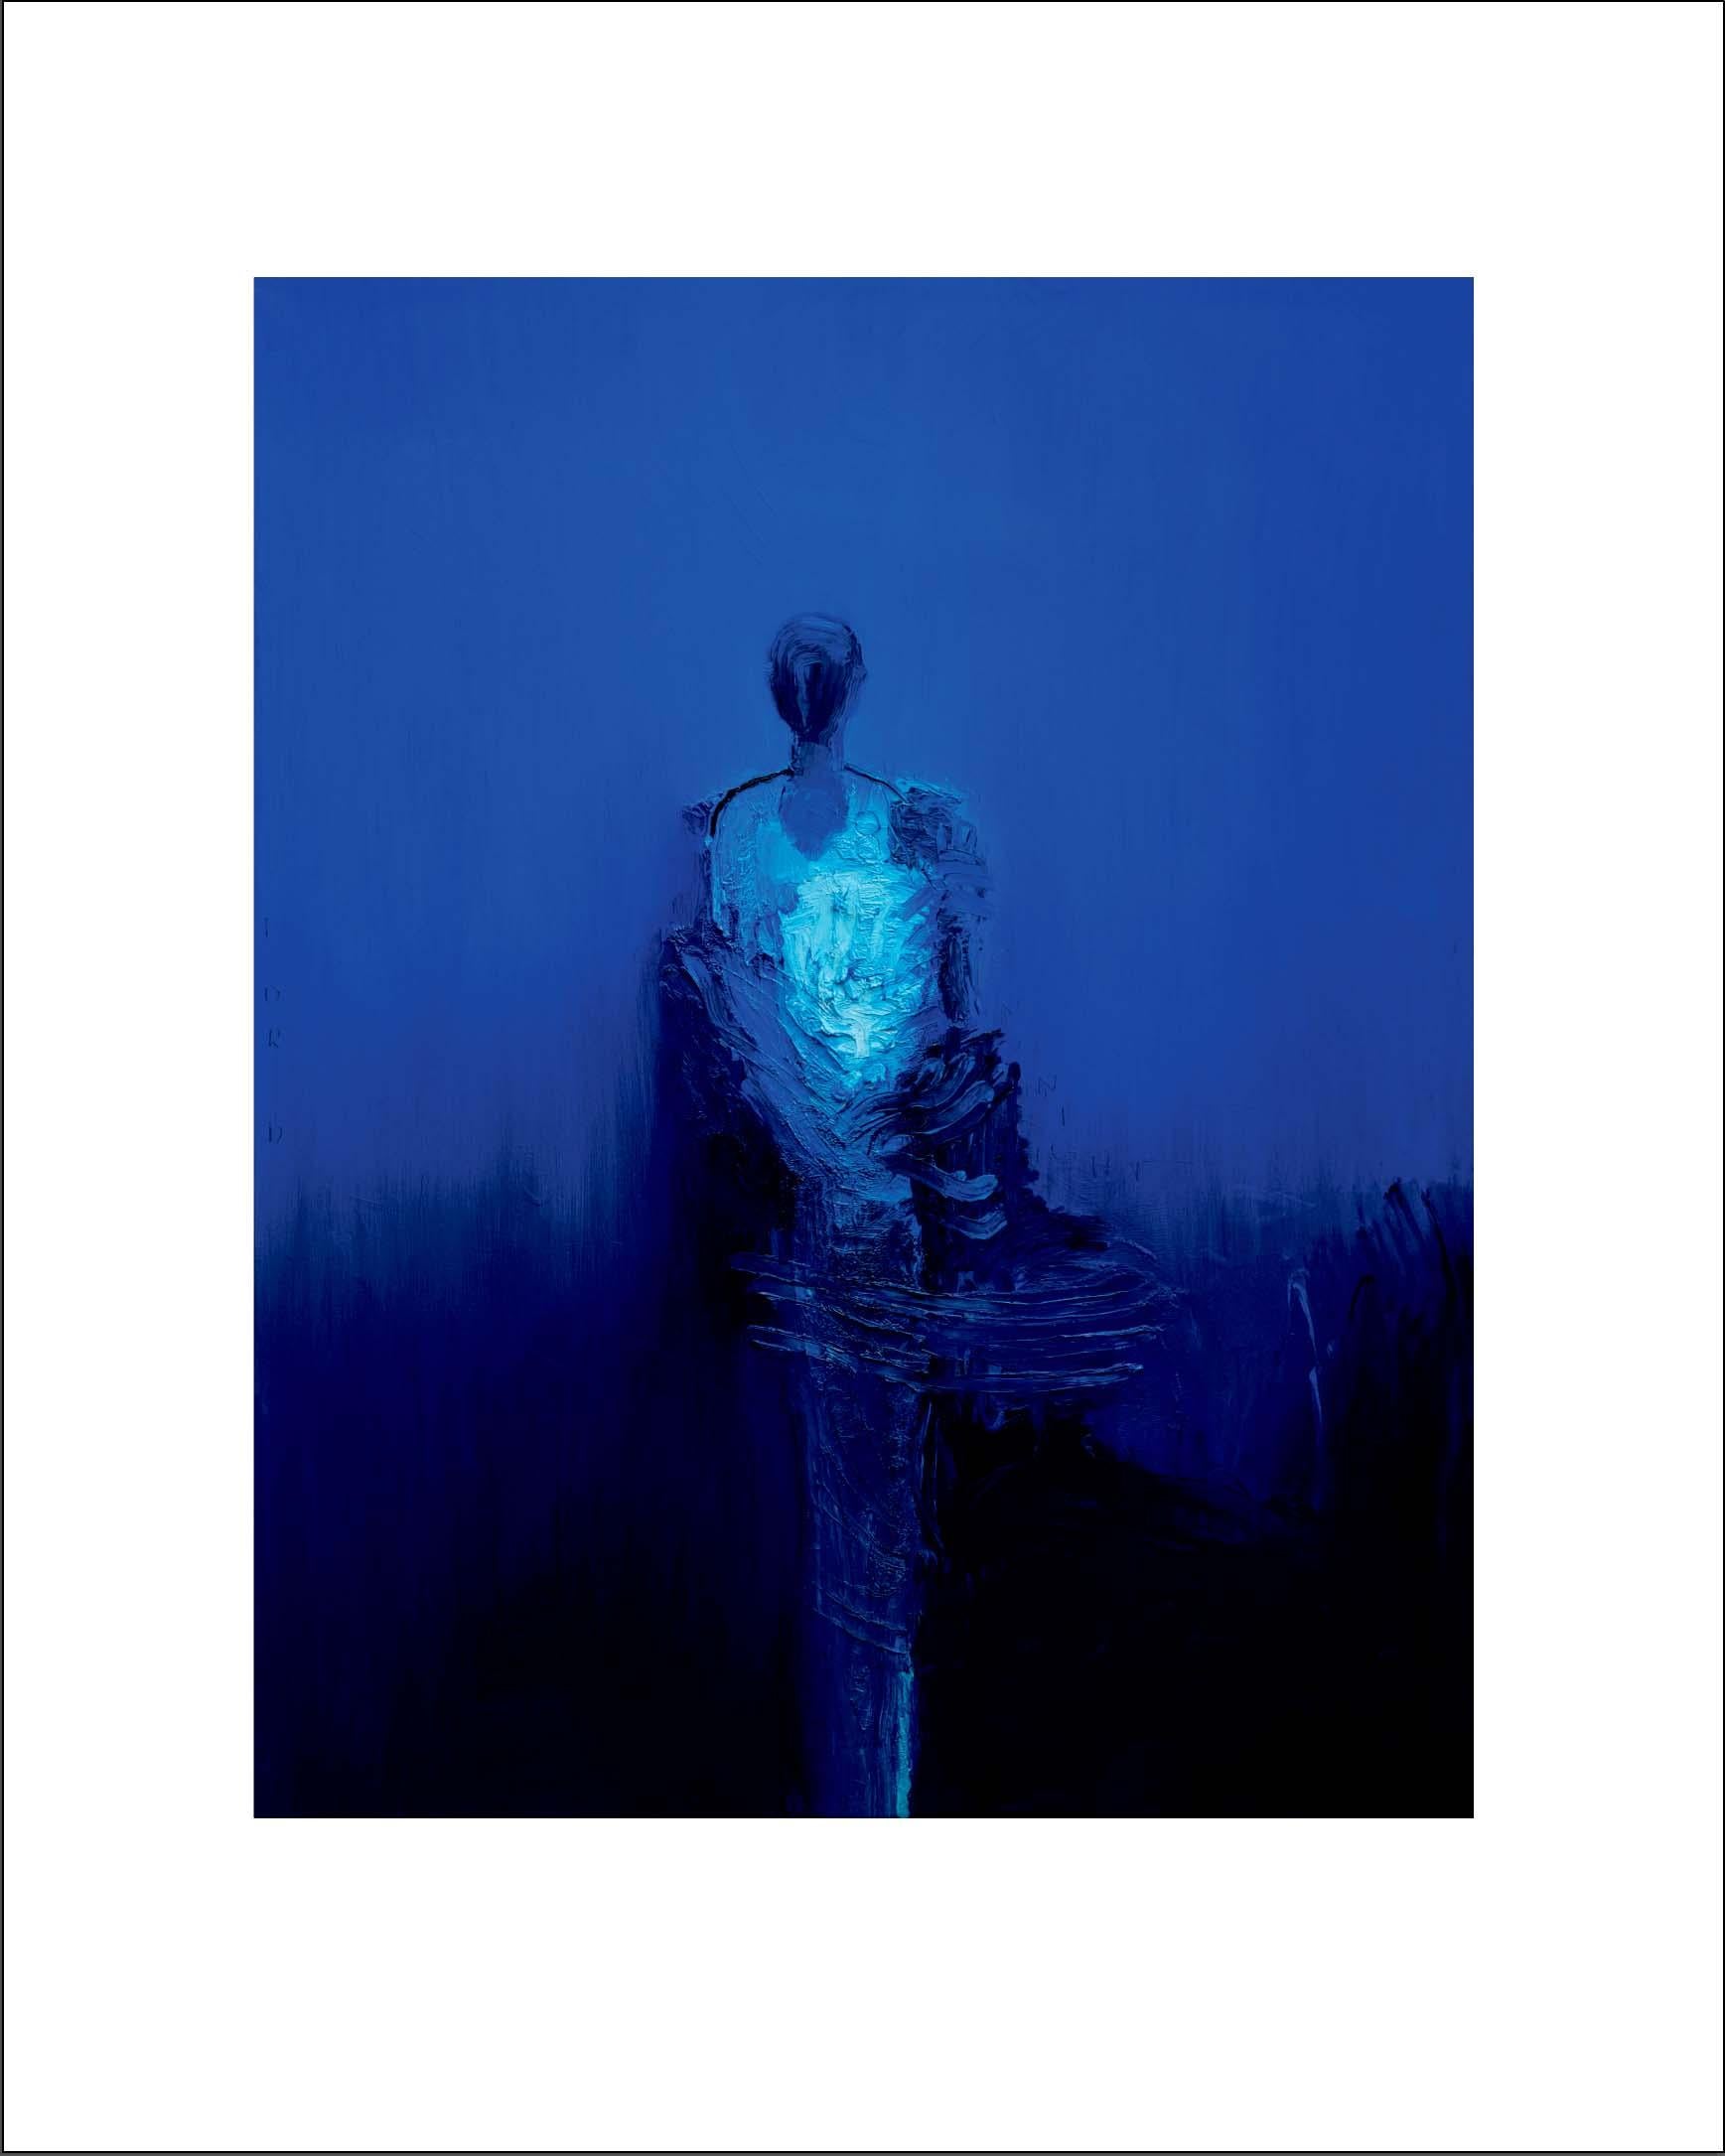  “Azul” Limited Print - Edition of 58 by Frank Arnold